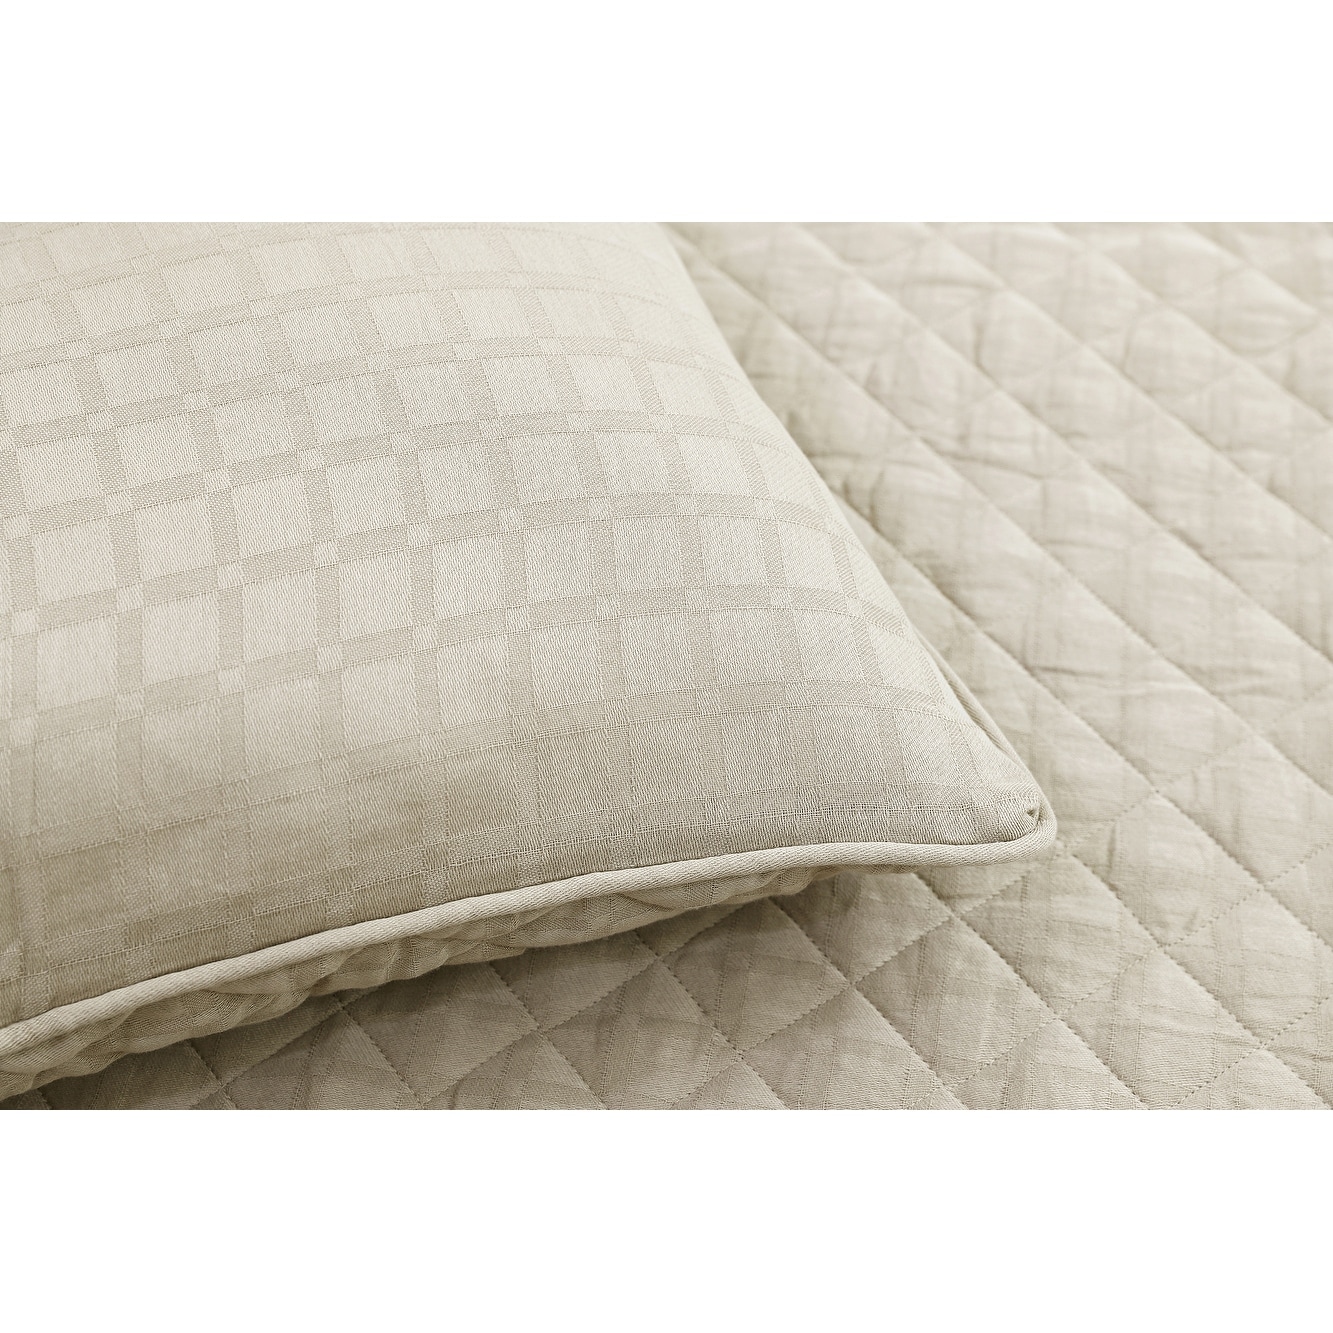  Trina Turk Dream Weaver 100% Cotton Quilted Coverlet Set -  Lightweight Breathable All Season Bedding Set, King, White : Home & Kitchen